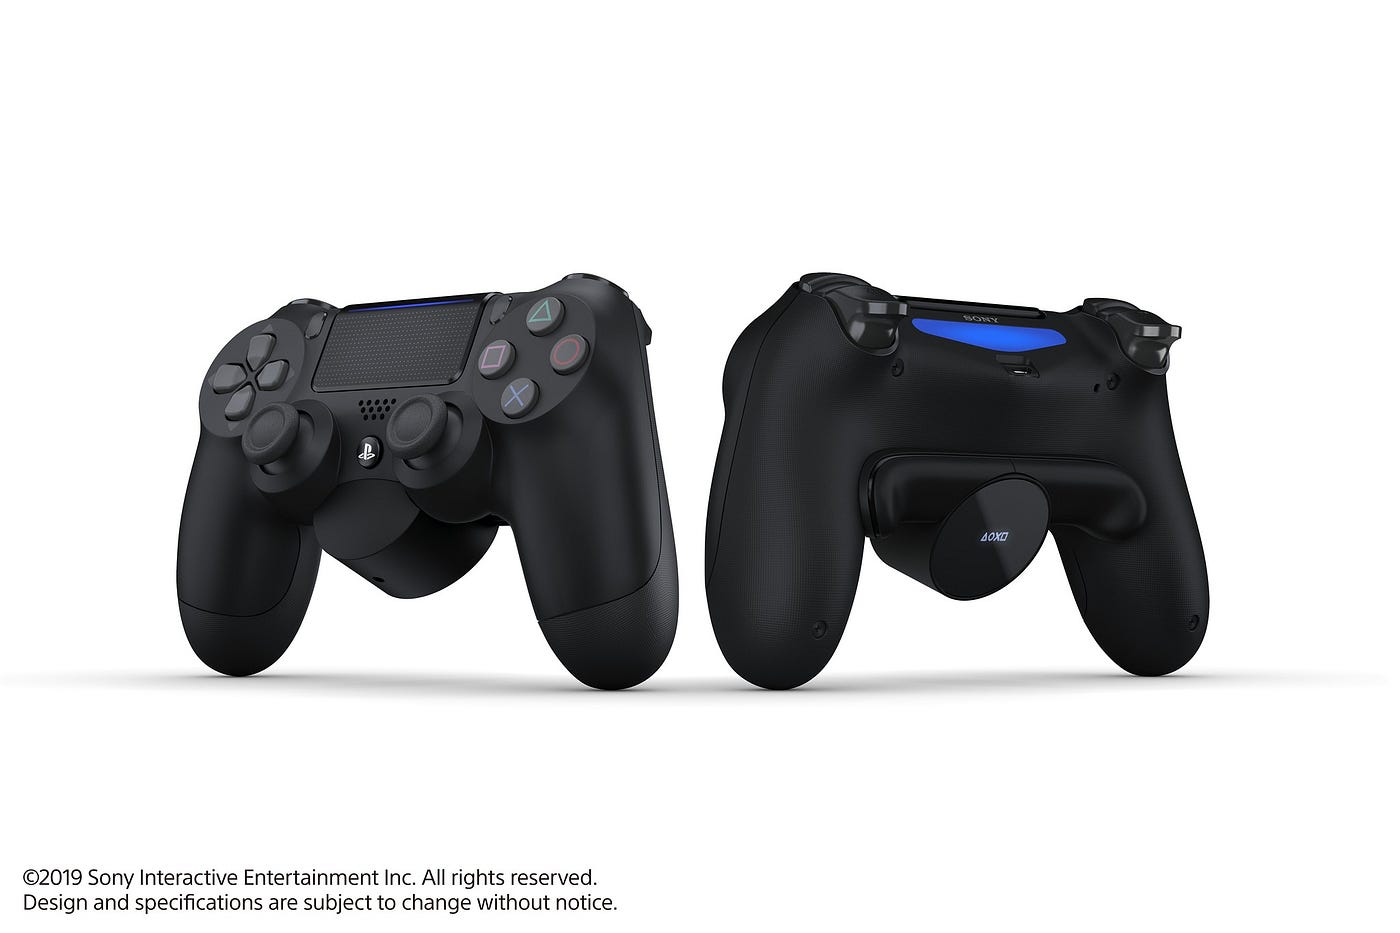 Will You Pay $30 for Two More DualShock 4 Buttons? | by Alex Rowe | Medium